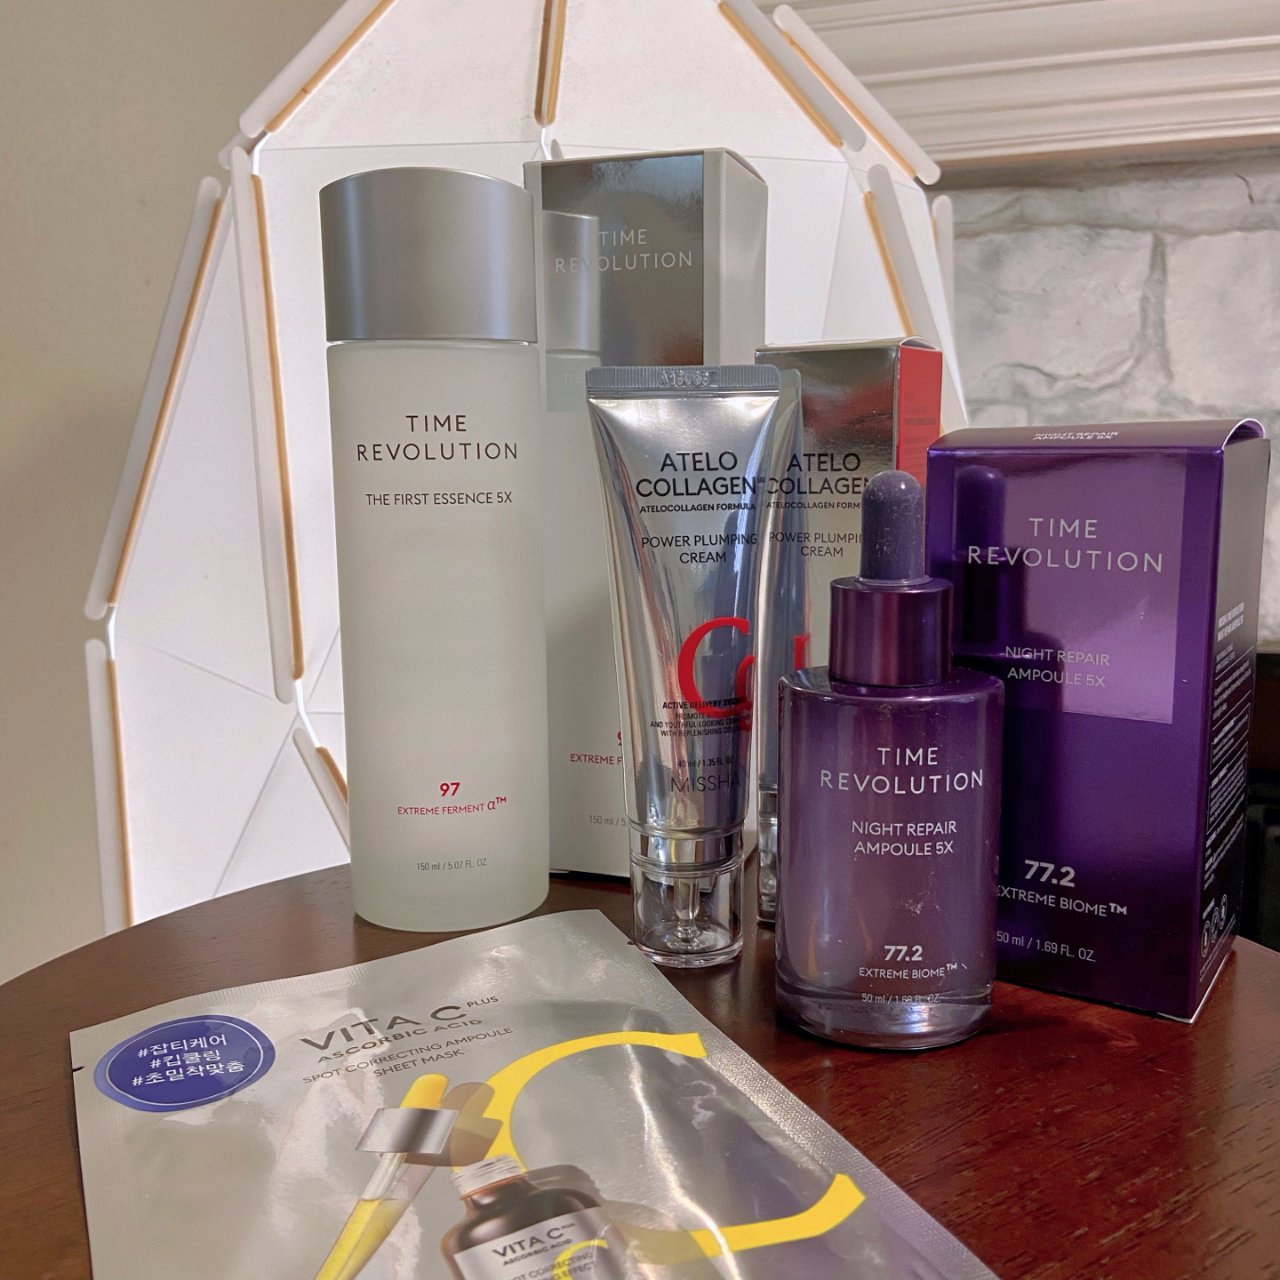 Time Revolution Night Repair Ampoule 5X – Missha. ABLE CNC US Inc,Time Revolution The First Essence 5X – Missha. ABLE CNC US Inc,Vita C Plus Spot Correcting Ampoule Sheet Mask | SKIN CARE – Missha. ABLE CNC US Inc,Atelo Collagen 500 Power Plumping Cream – Missha. ABLE CNC US Inc